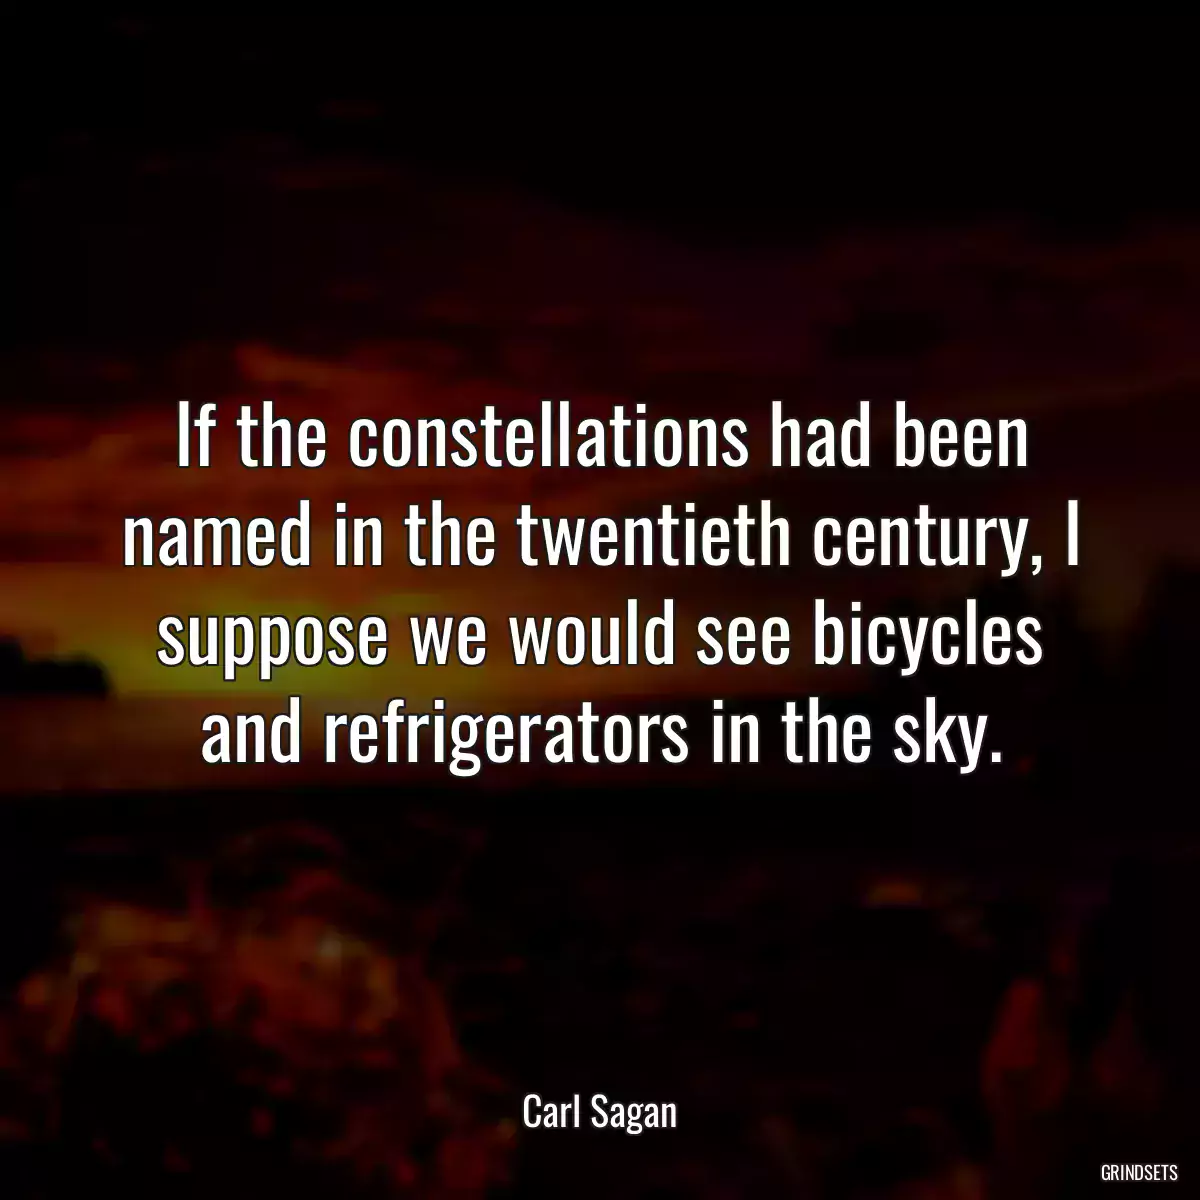 If the constellations had been named in the twentieth century, I suppose we would see bicycles and refrigerators in the sky.